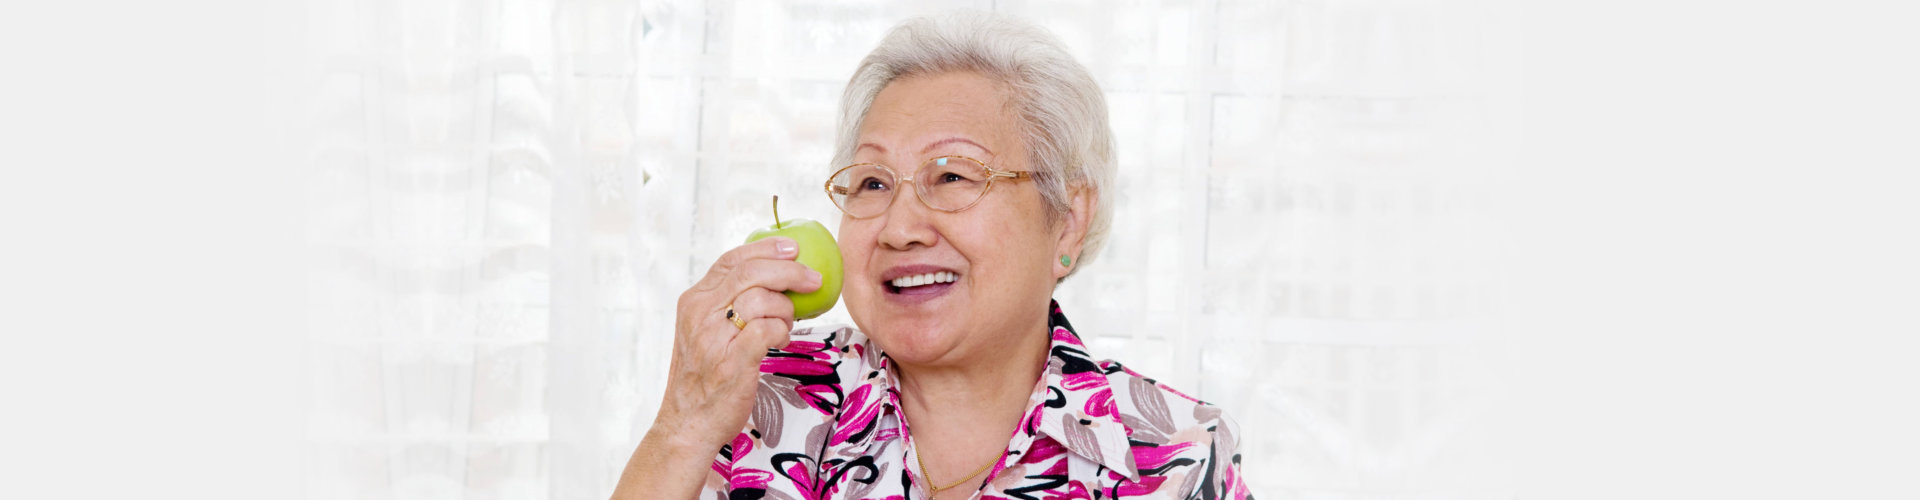 old woman holding the apple